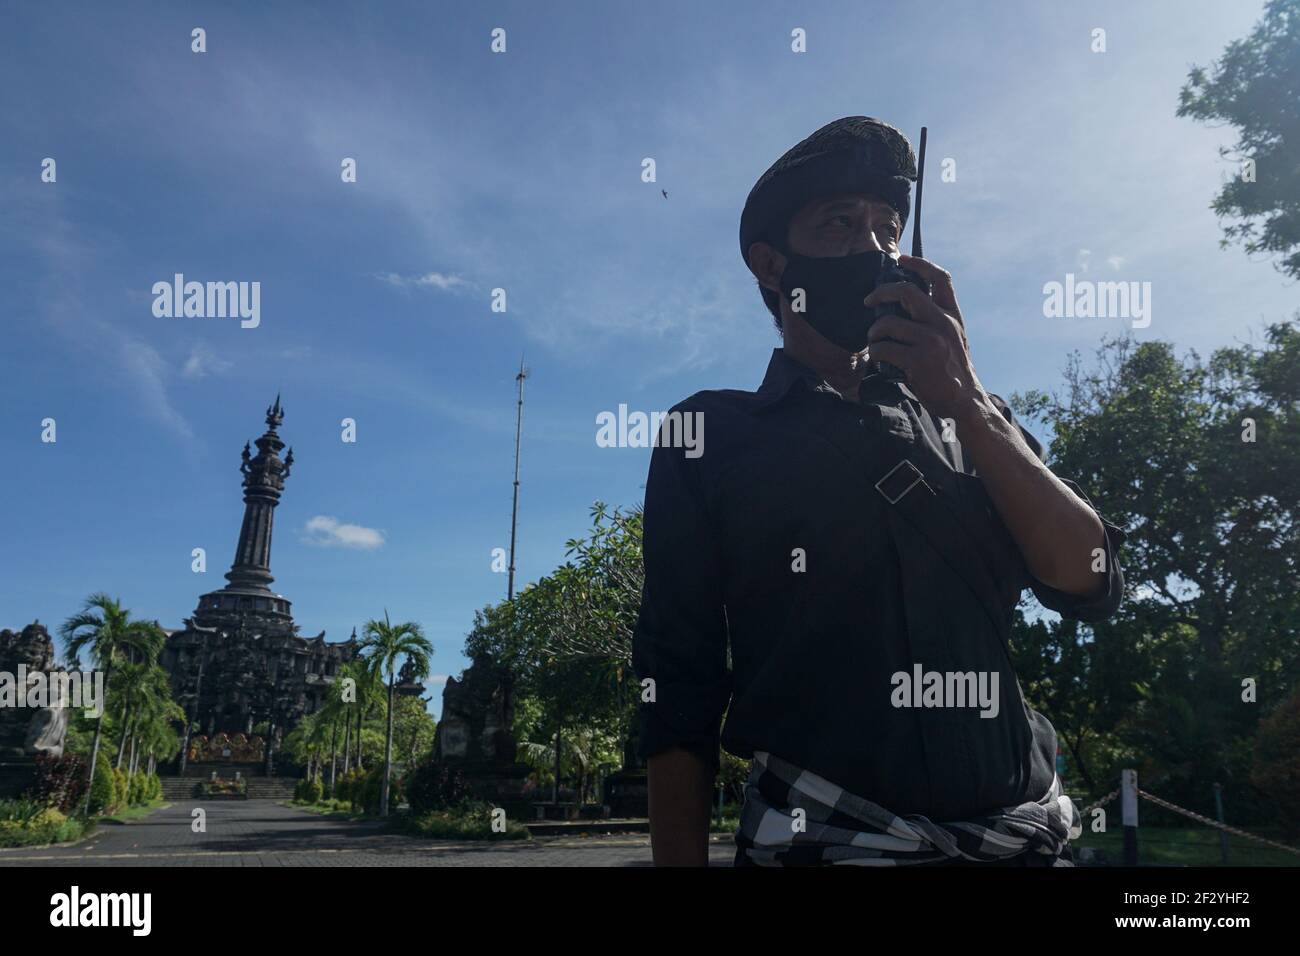 Bali, Indonesia. 14th Mar, 2021. A security official stands guard on street during the Nyepi Day, or the Day of Silence, amid the COVID-19 outbreak at Denpasar, Bali, Indonesia, March 14, 2021. Nyepi marks the New Year day of the Balinese Saka calendar in Indonesia. On this public holiday, locals devote themselves to fasting and meditation, while refraining from practices such as lighting fires, working, traveling and entertaining. Credit: Bisinglasi/Xinhua/Alamy Live News Stock Photo